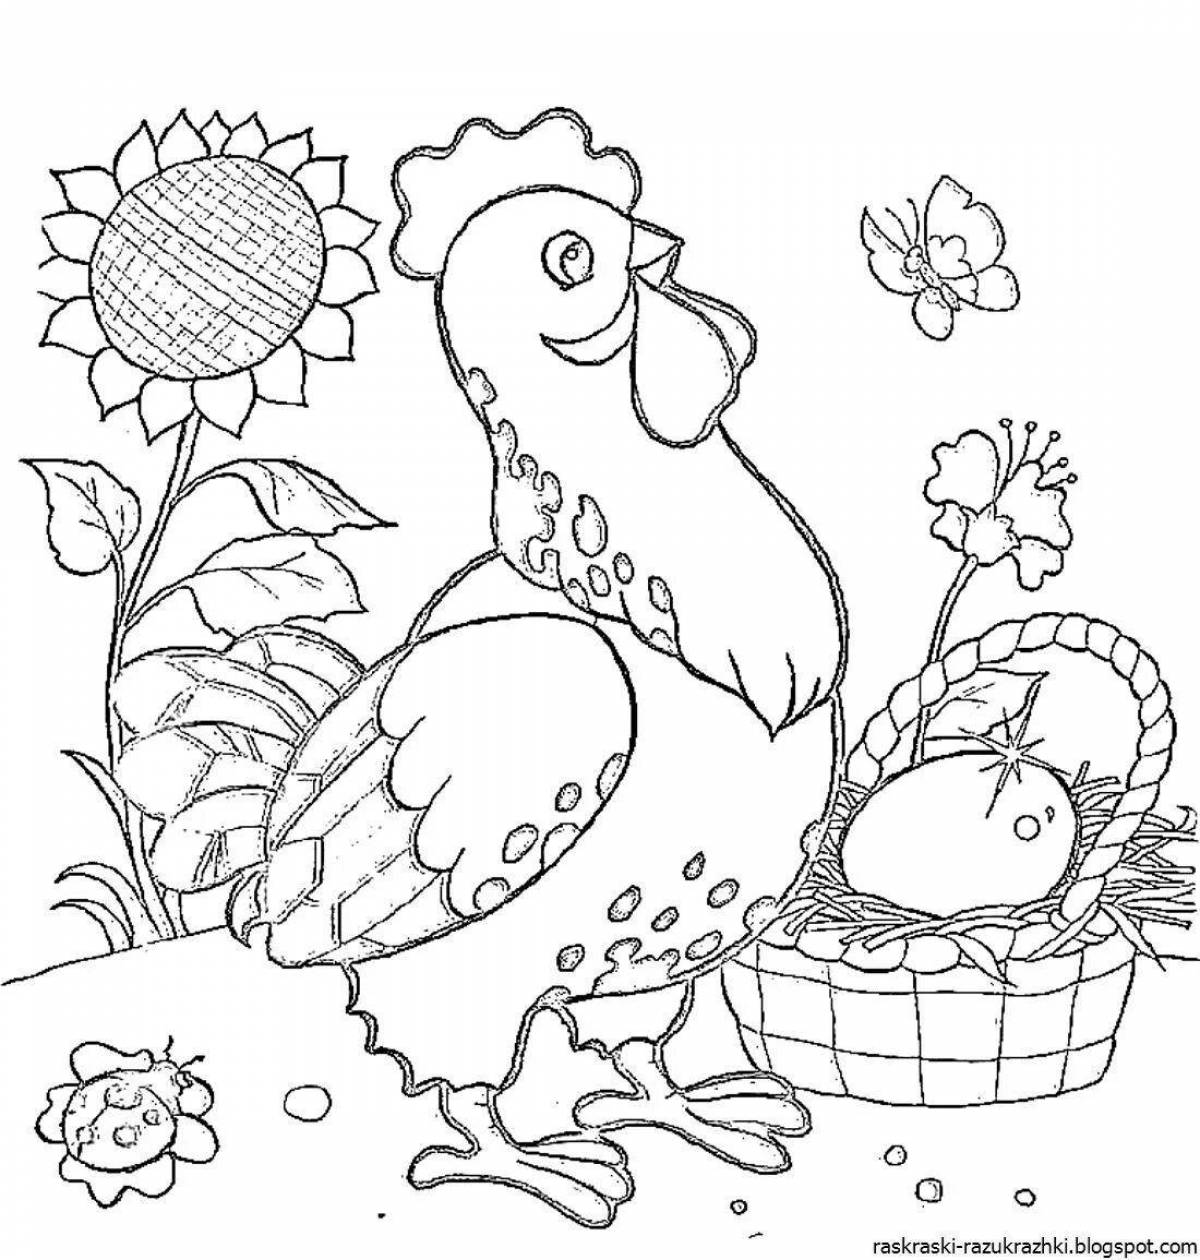 Fairytale chicken ruffles coloring book for kids